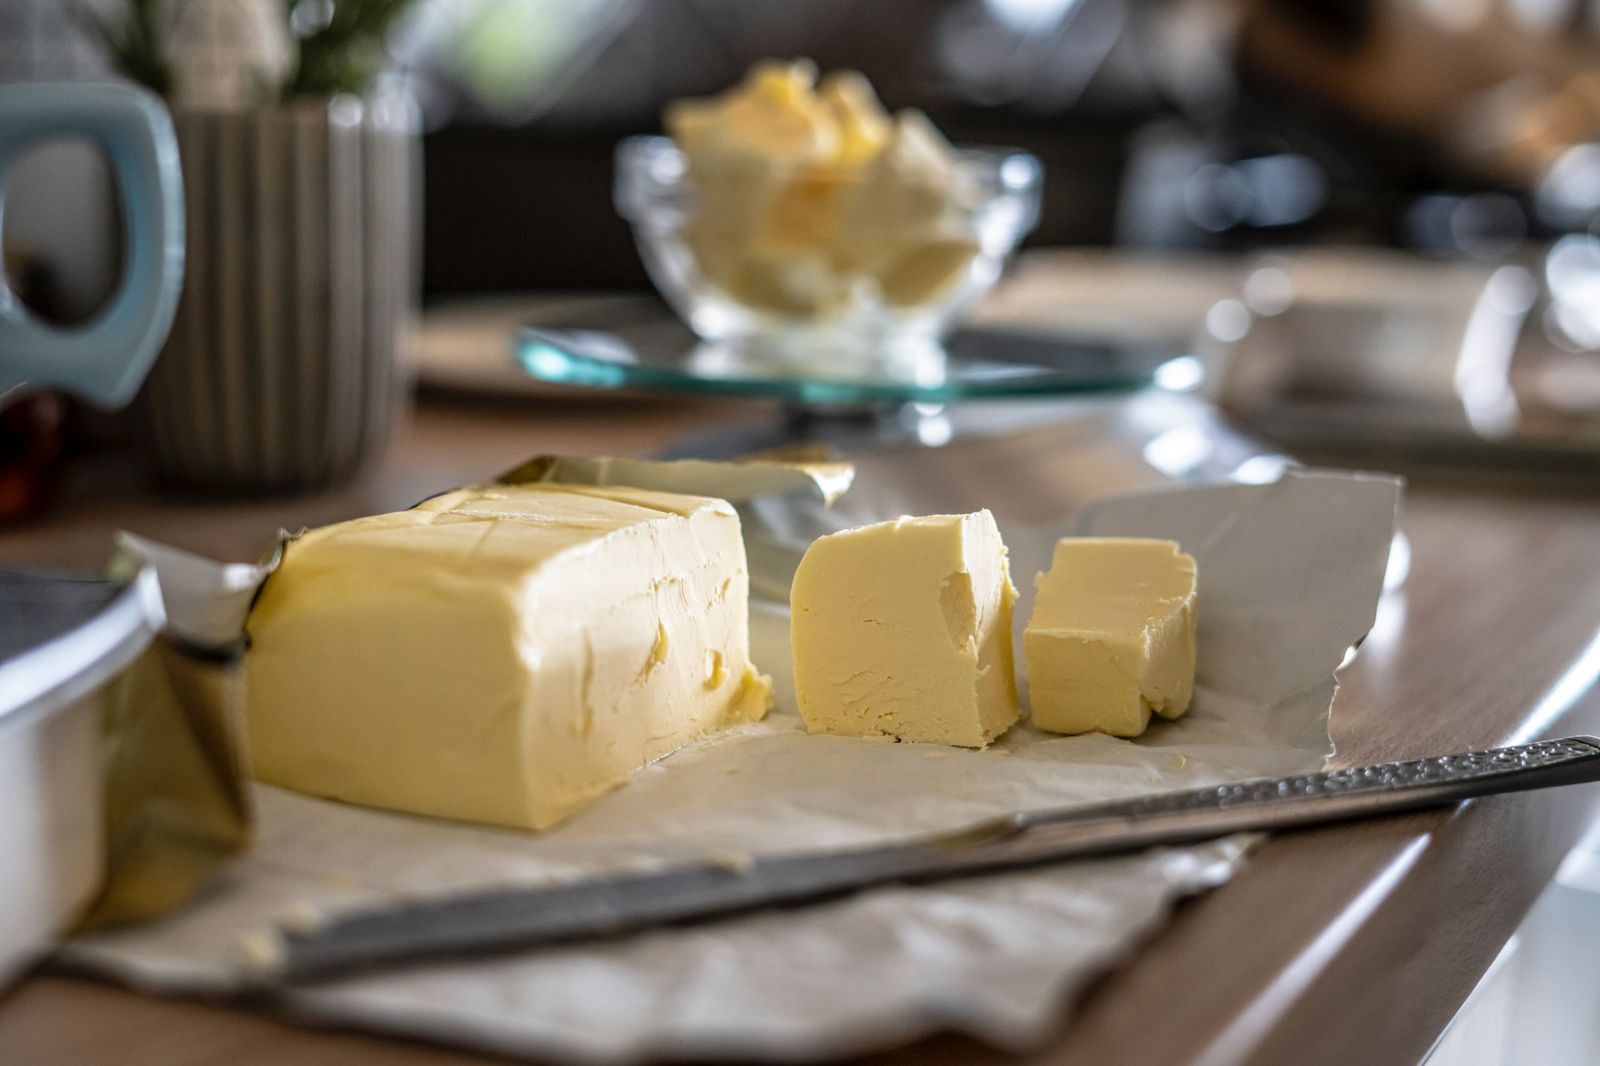 A brick of butter cut into smaller pieces with a knife.